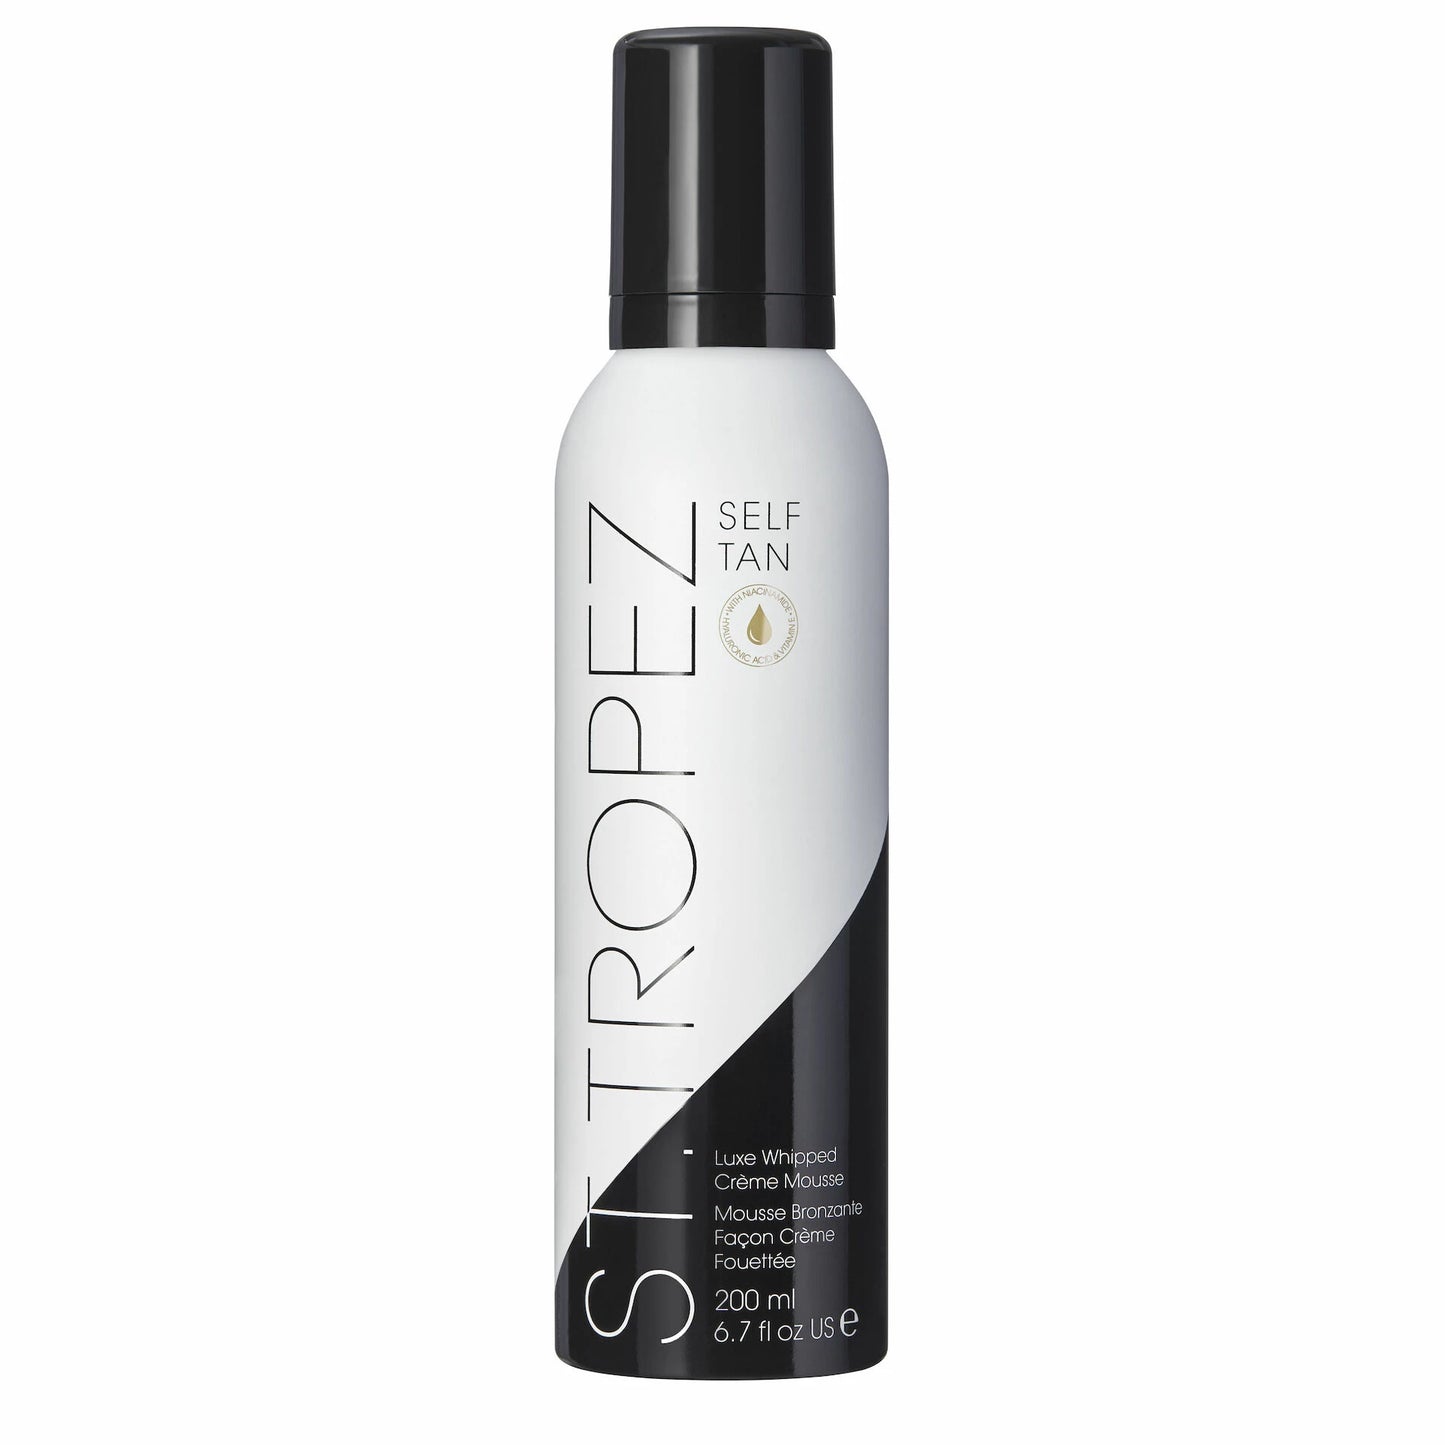 St. Tropez Self Tan Luxe Whipped Crème Mousse 200ml